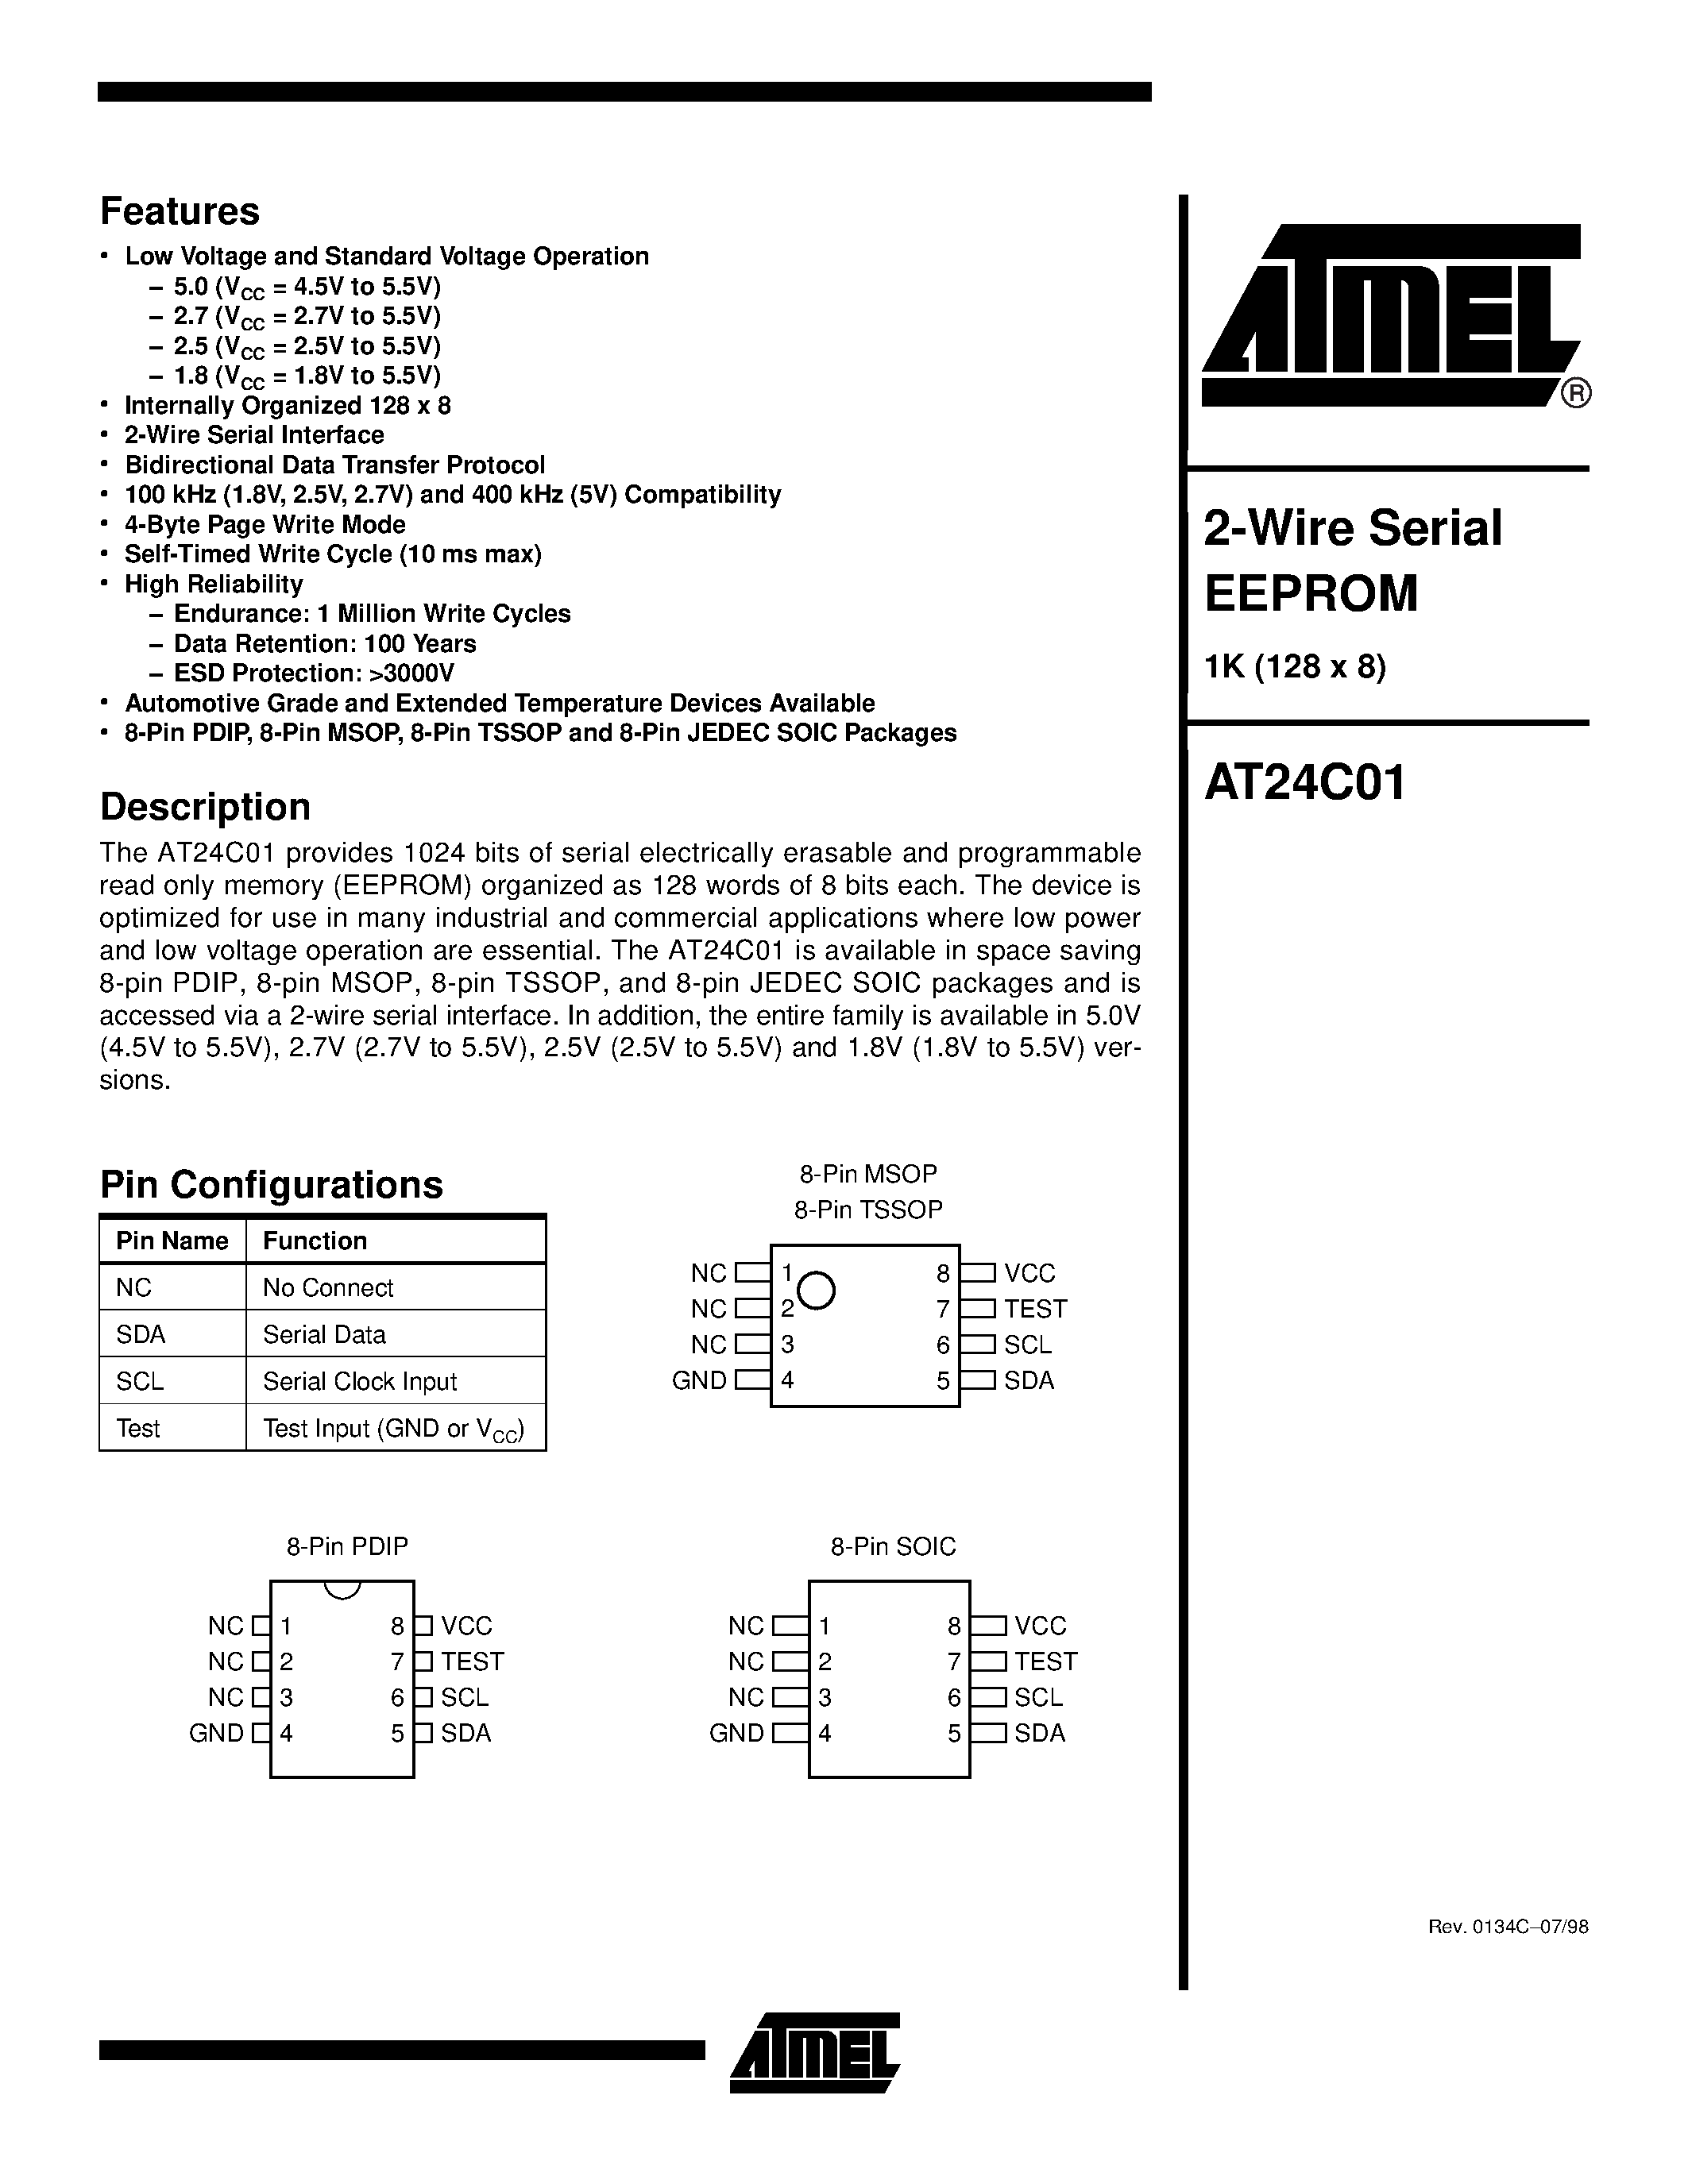 Даташит AT24C01-10PC-2.7 - 2-Wire Serial EEPROM страница 1